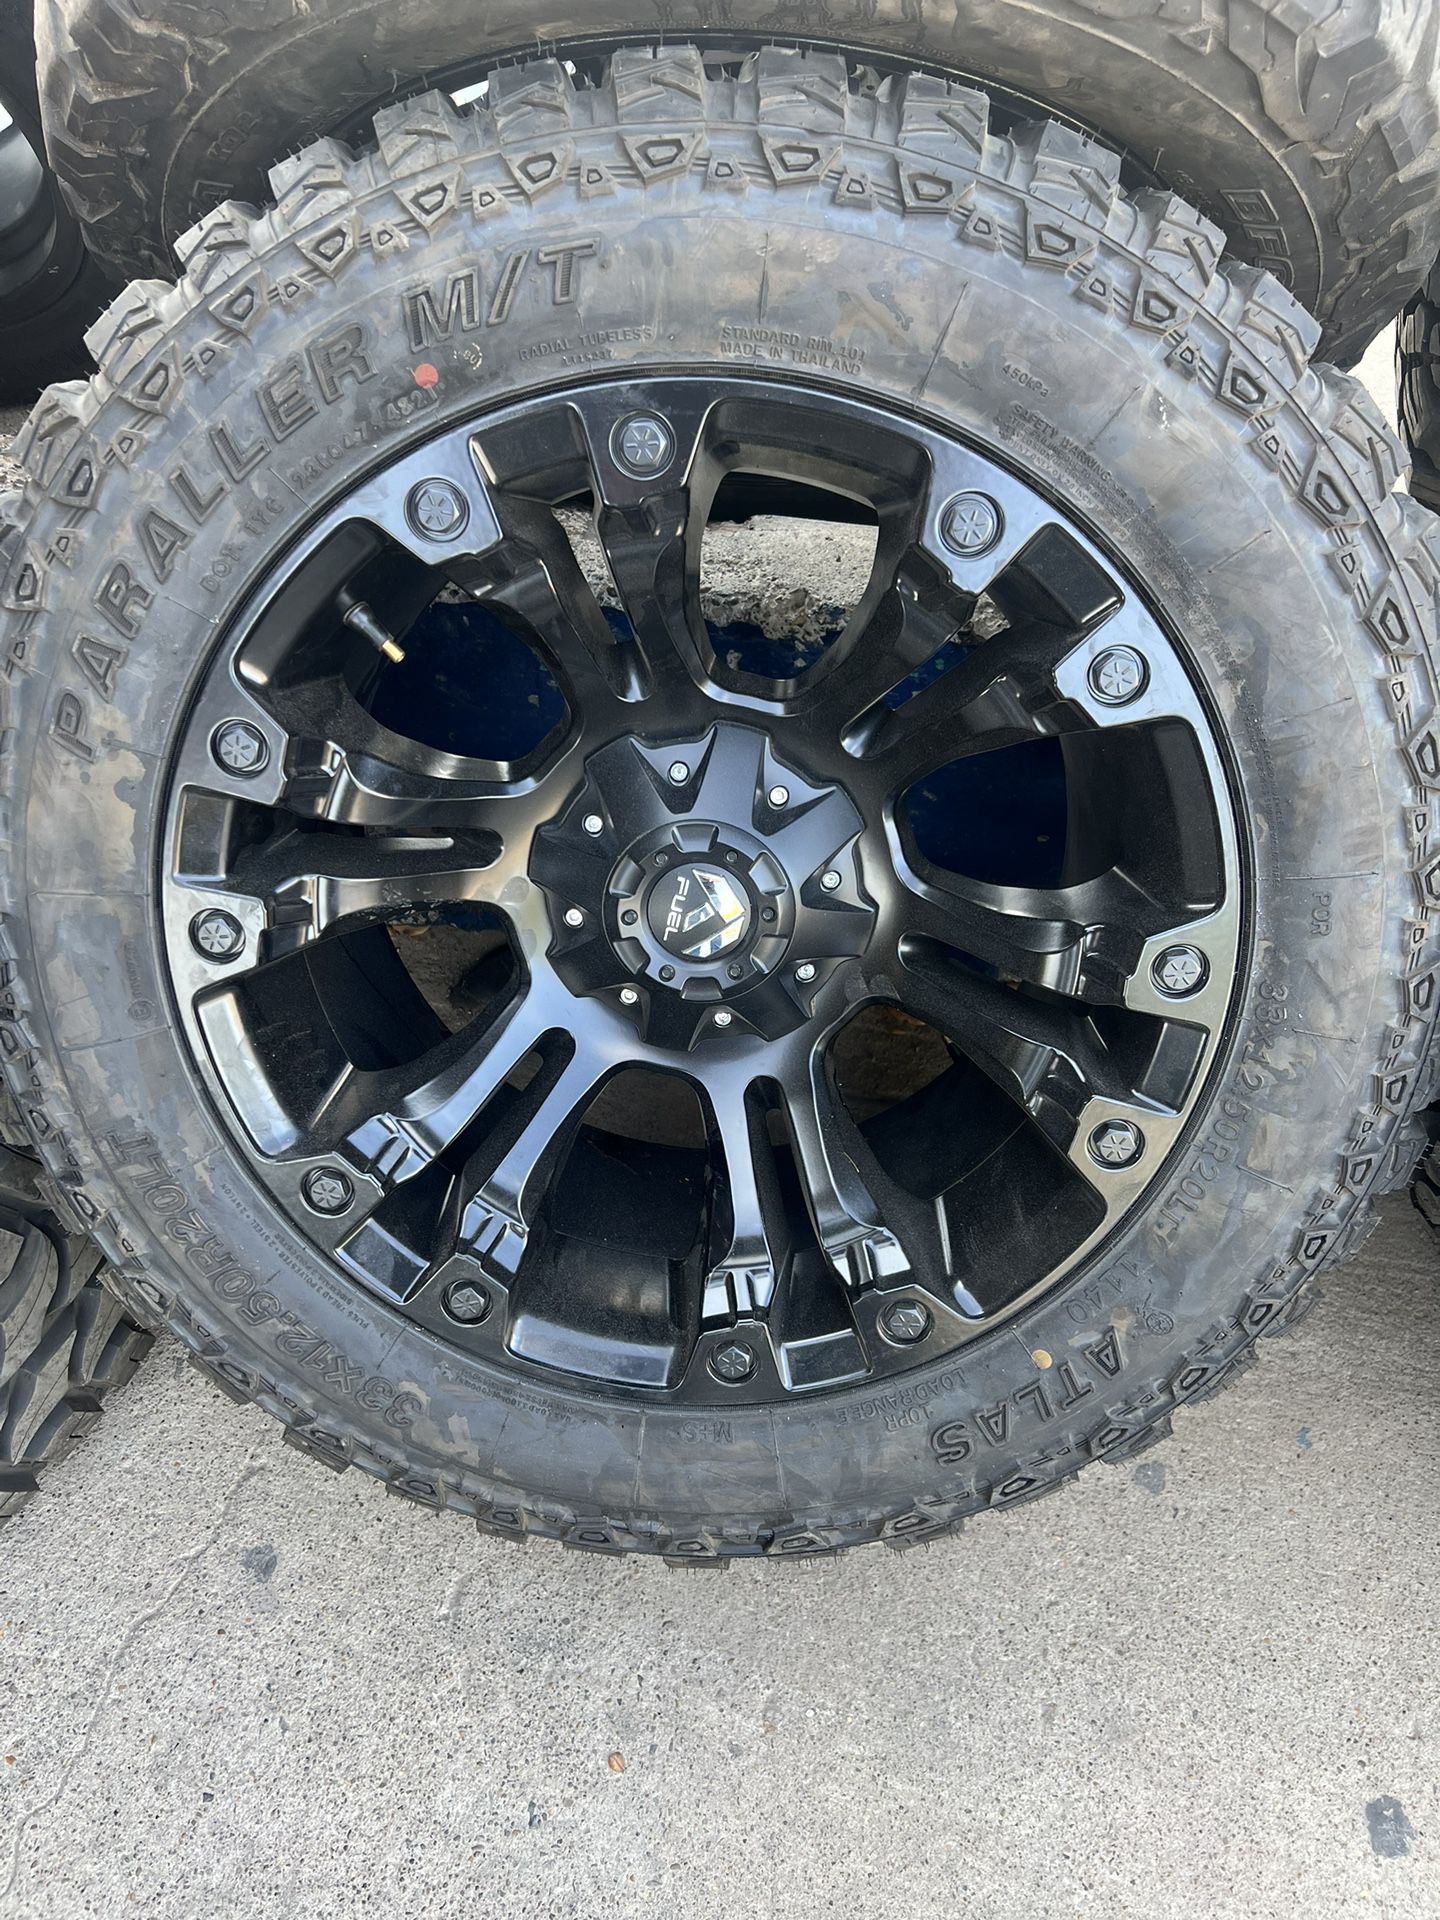 BRAND NEW SET OF FUEL WHEELS AND MUD TIRES FOR JEEP/CHEVY OBS